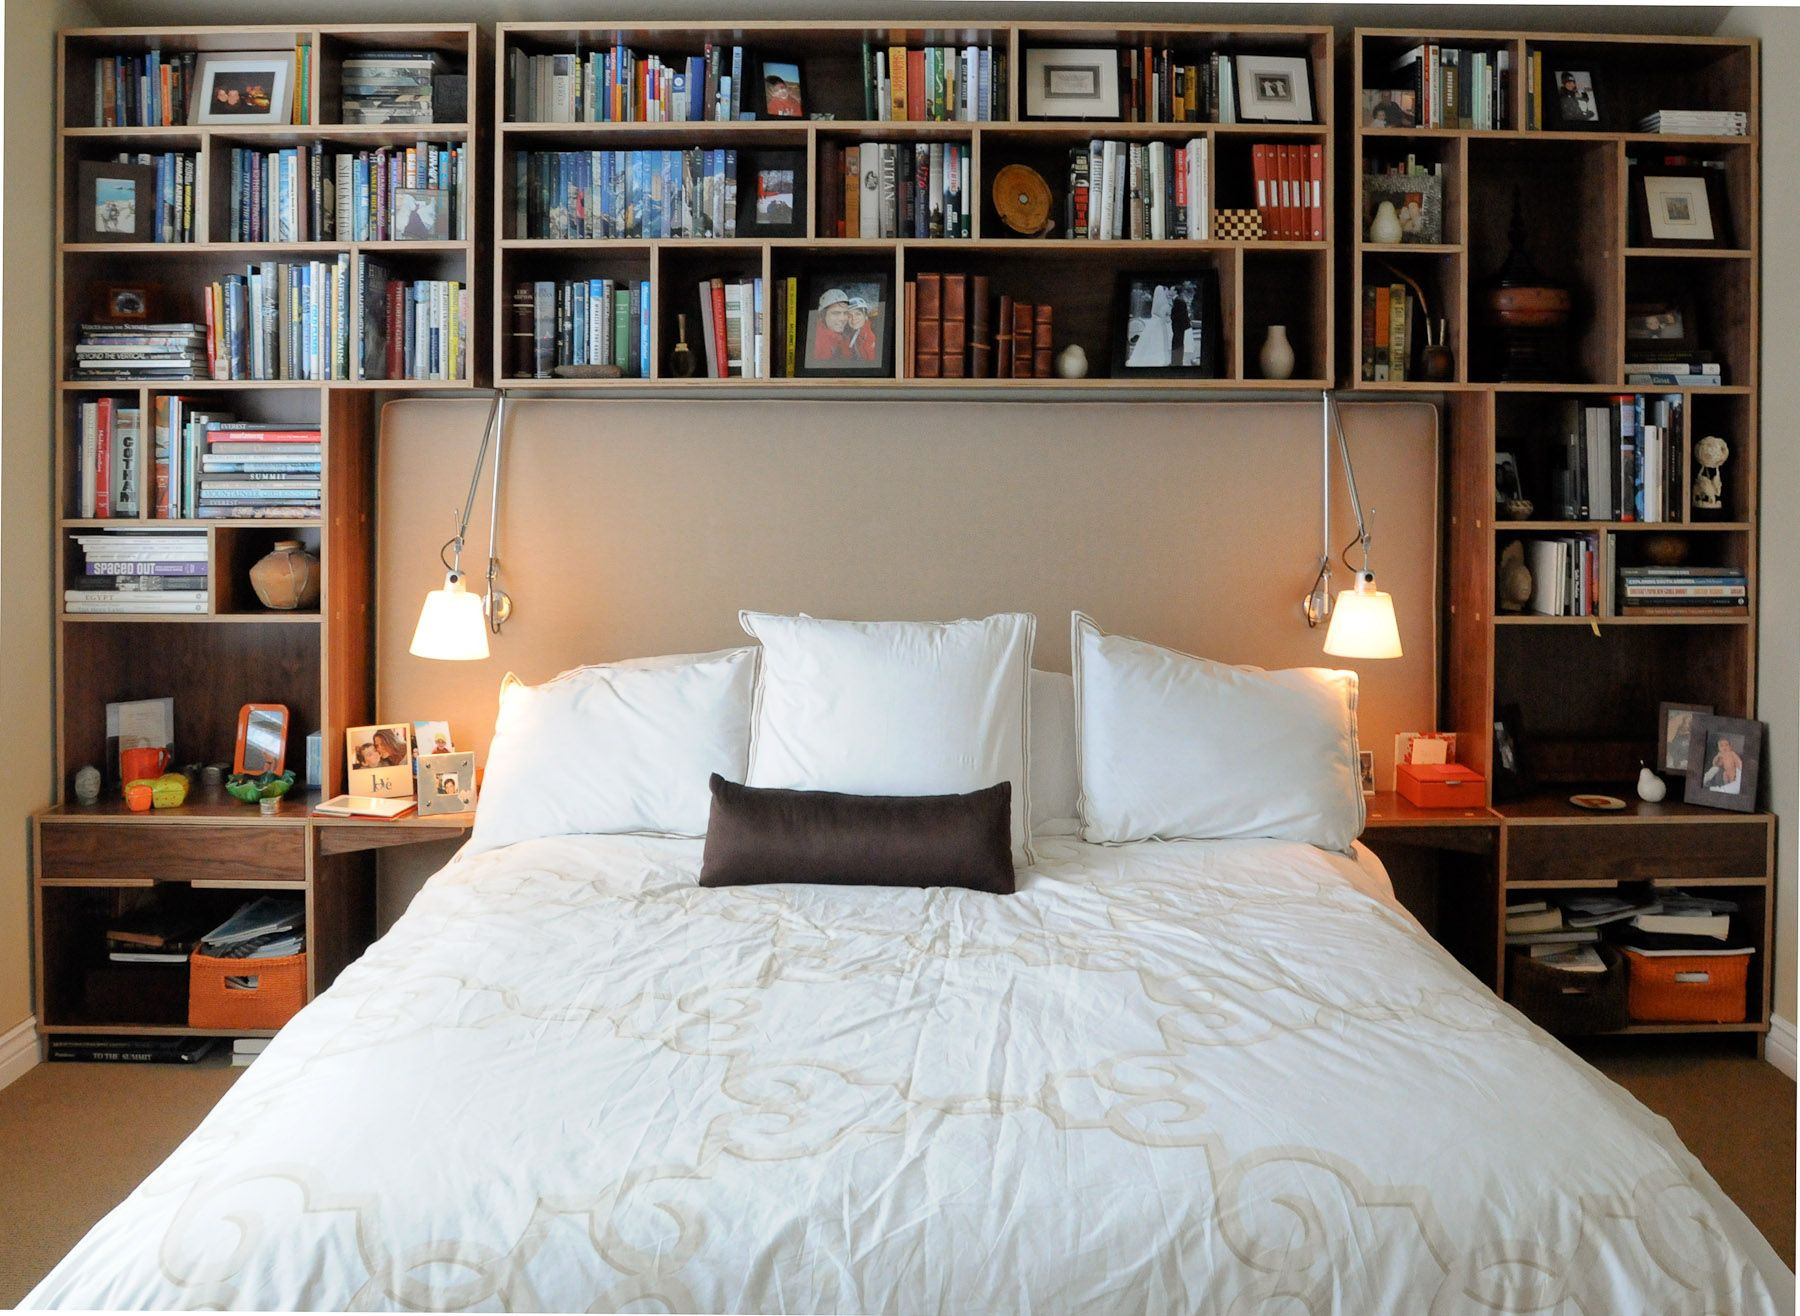 Shelf Ideas For Small Bedroom
 Kerf Design Work Built in Bookcases